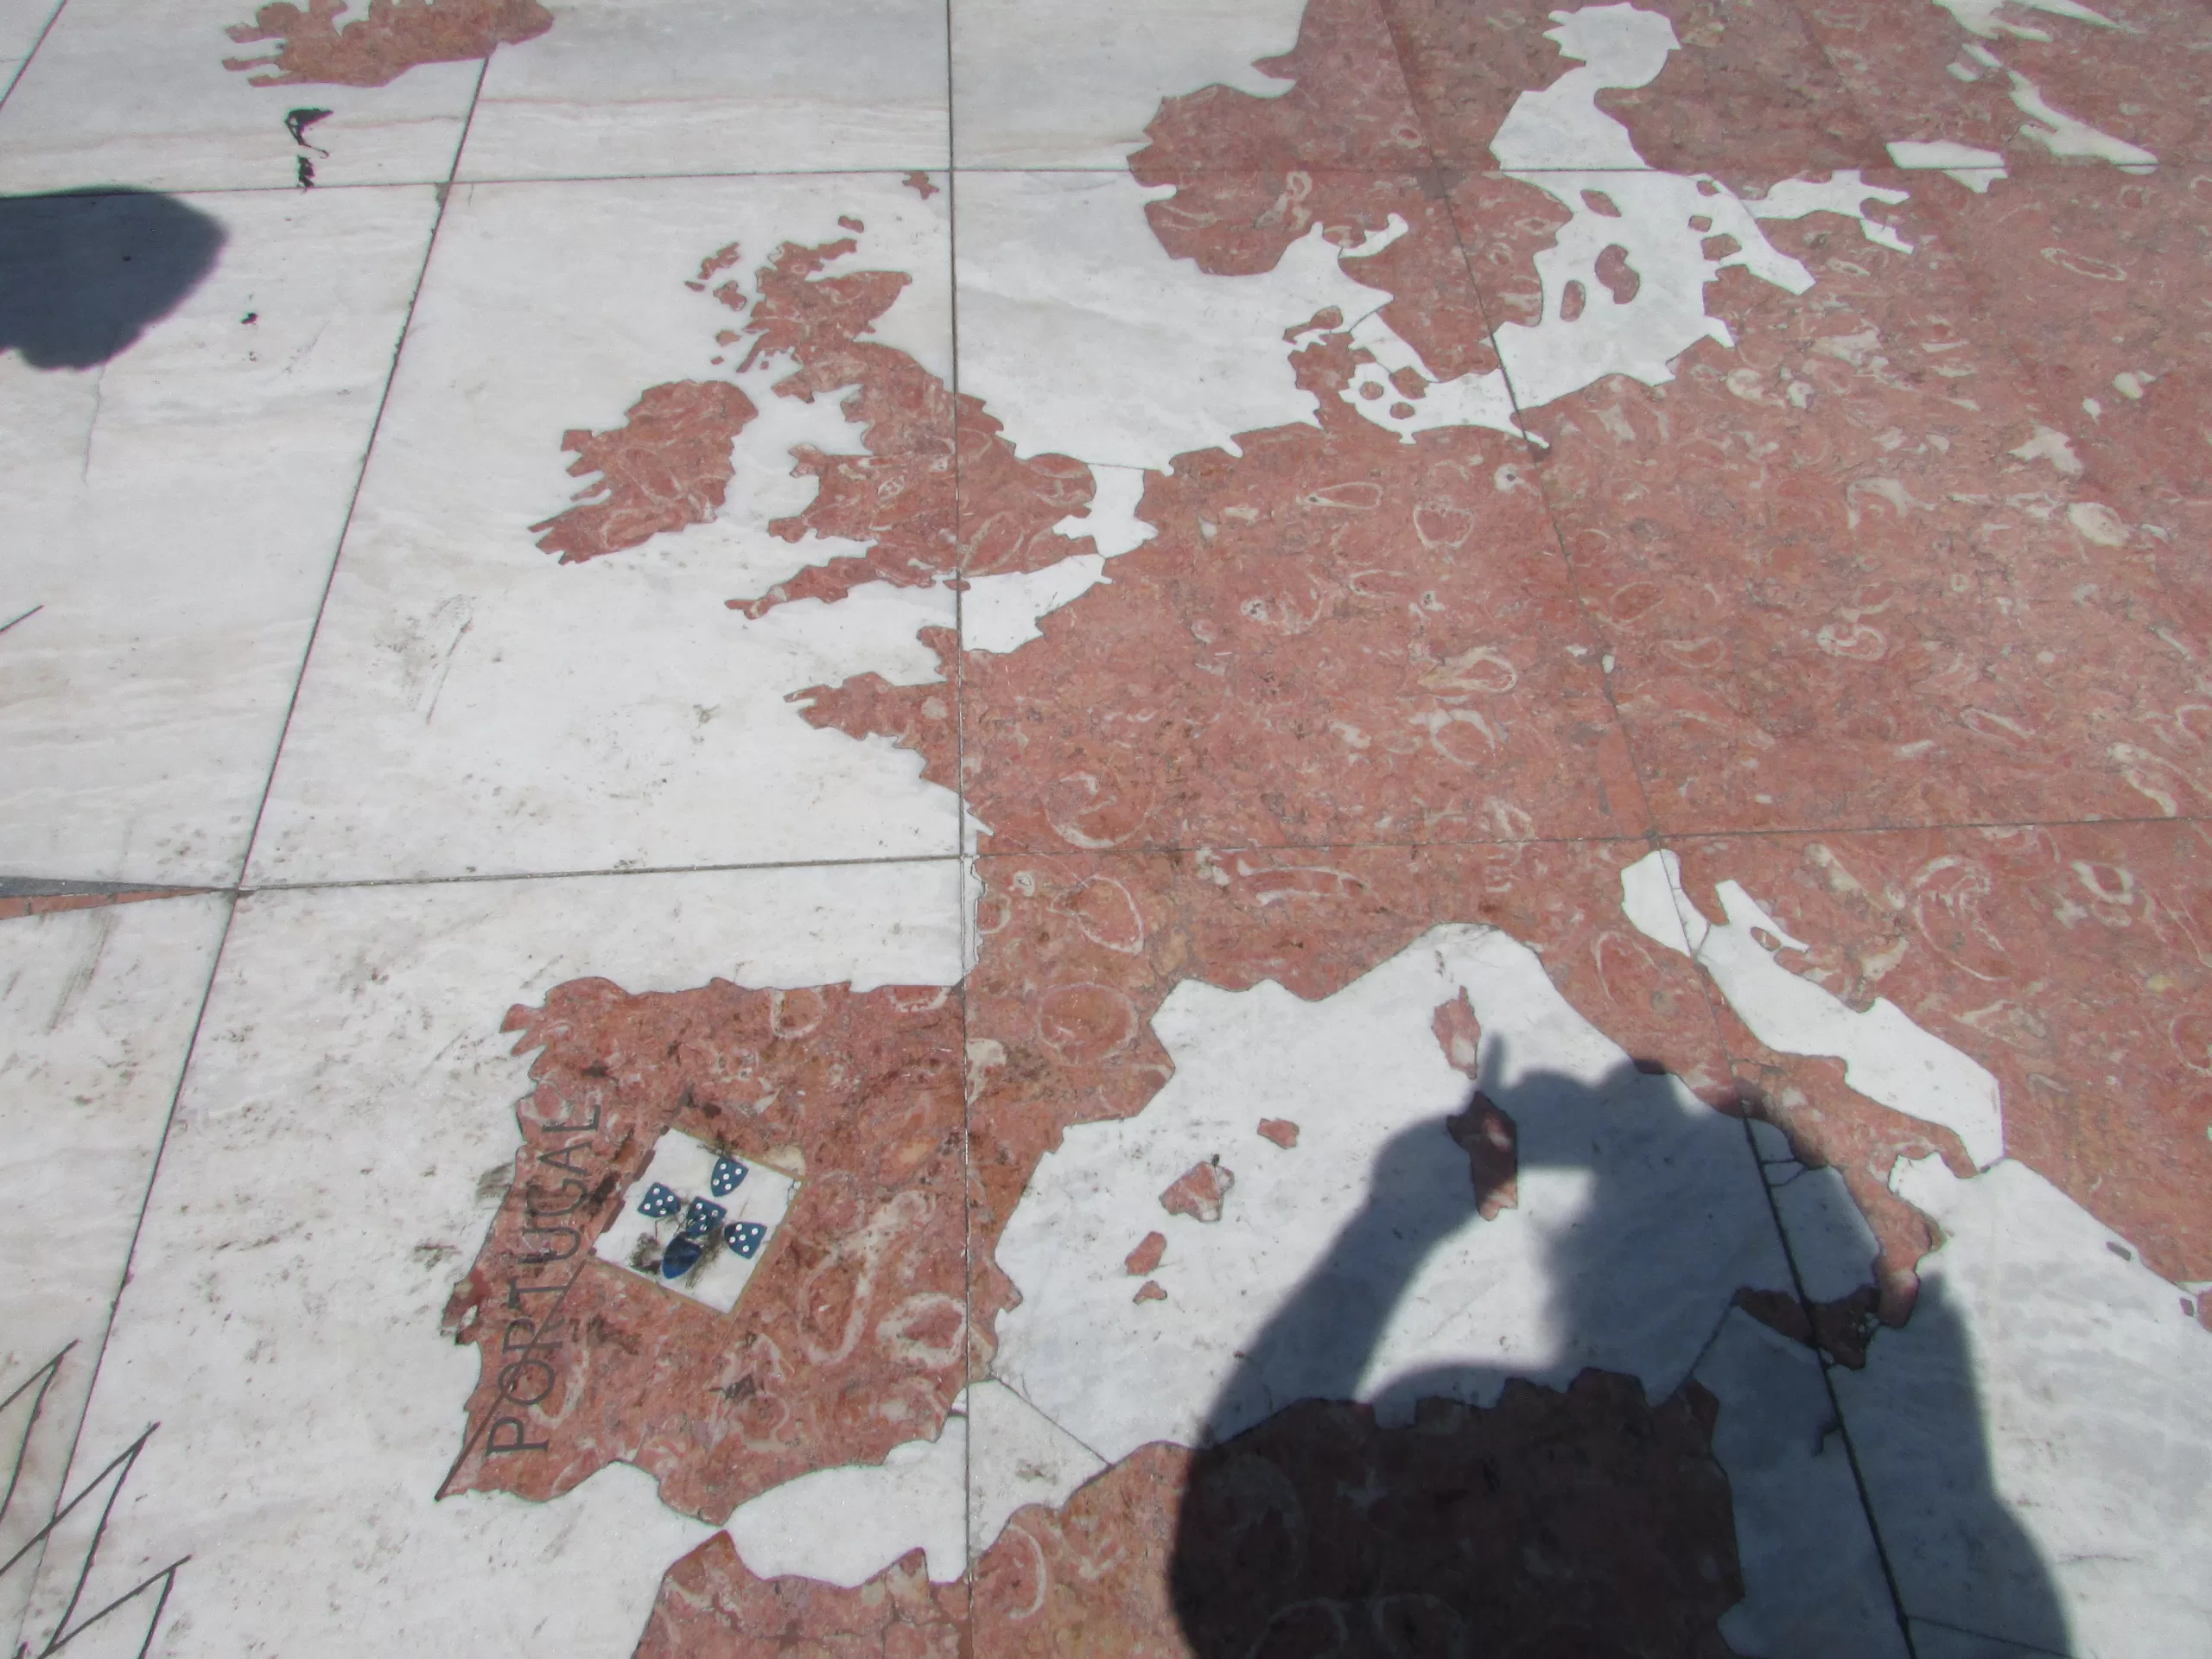 map of Europe on the pavement, shadow of photographer, Lisbon, portugal